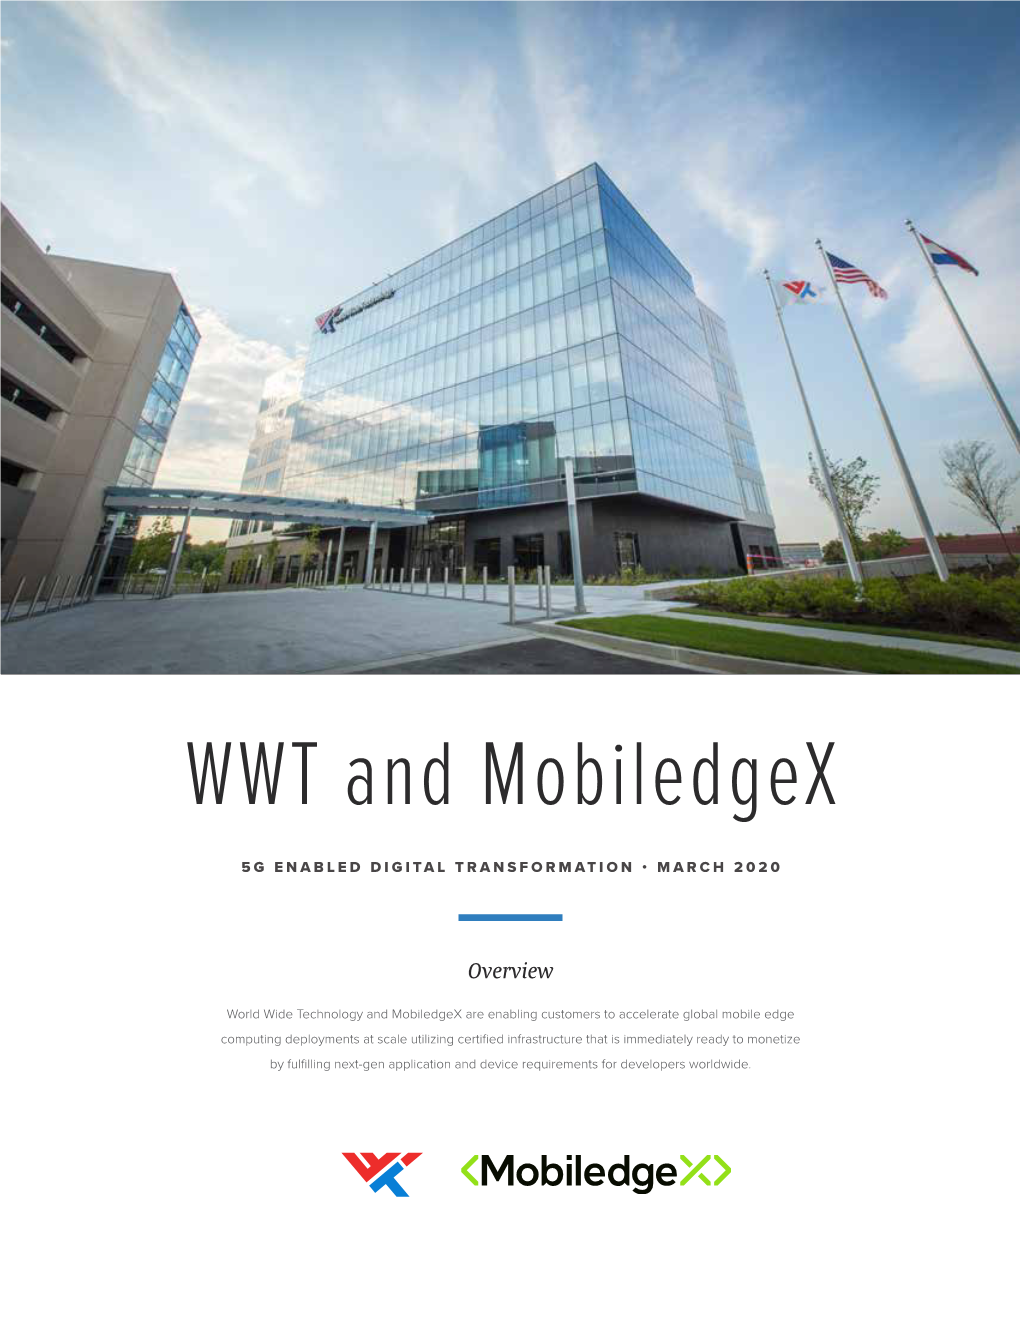 WWT and Mobiledgex 5G Enabled Digital Transformation